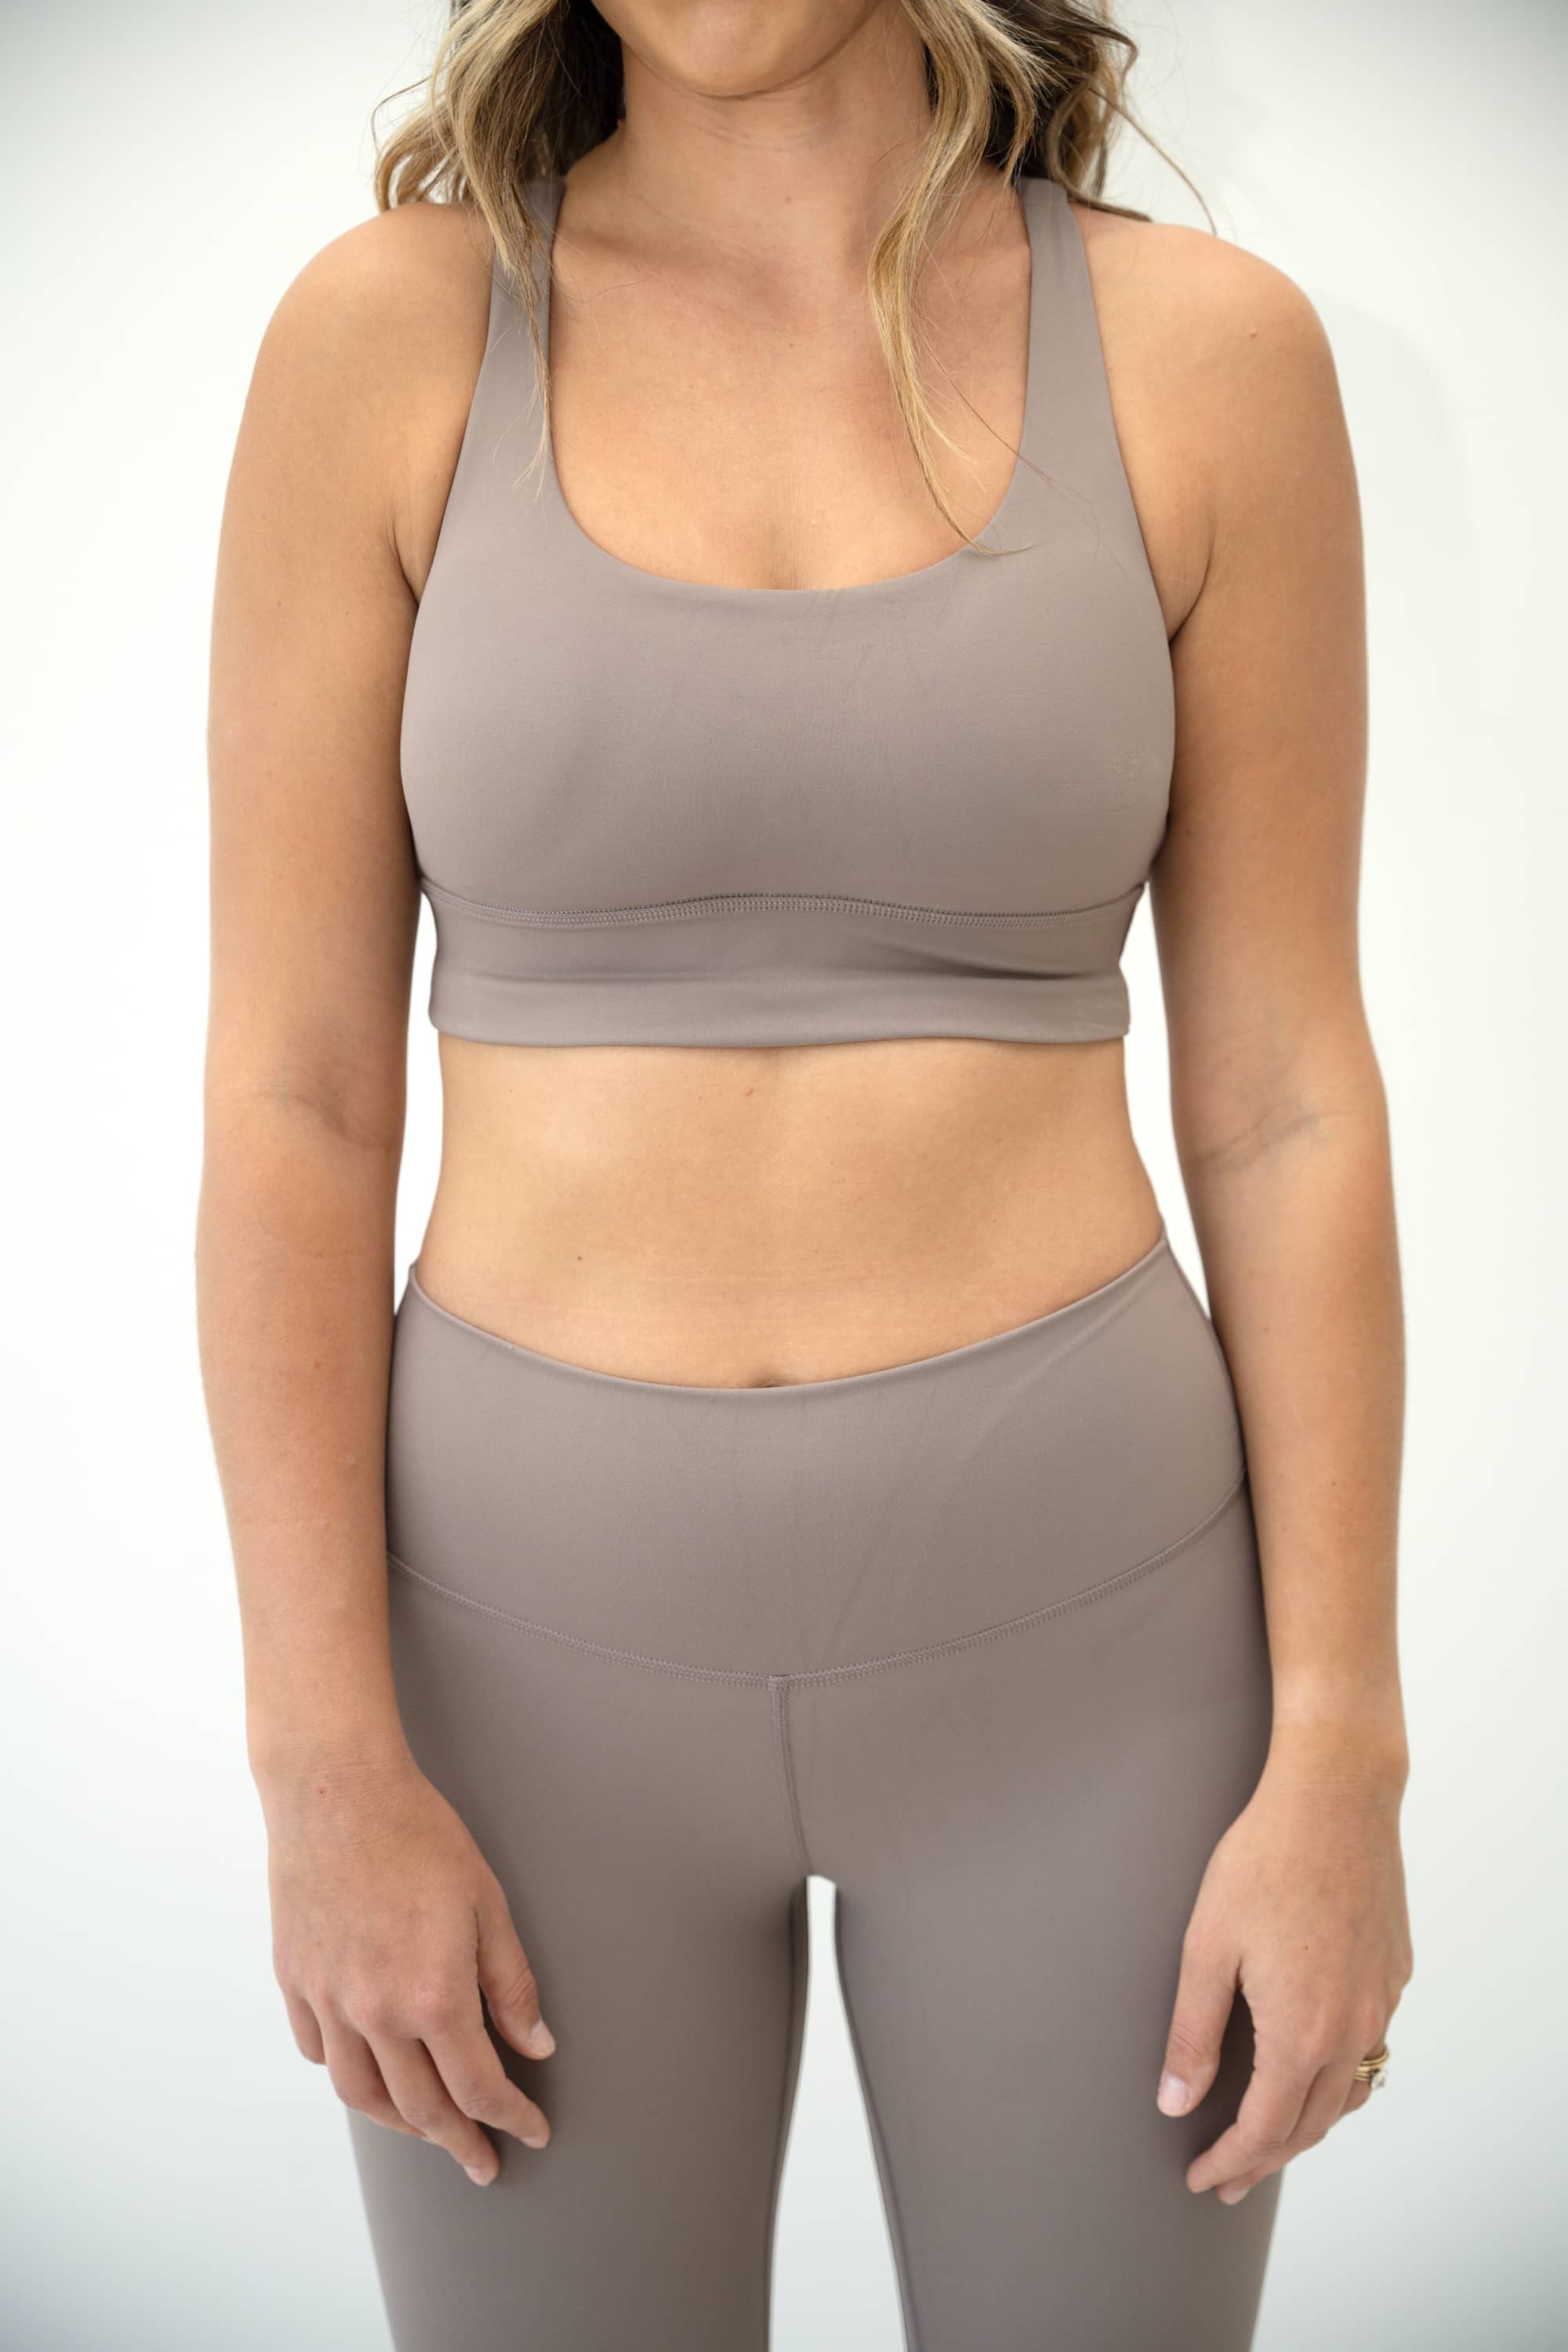 POWER longline sports bra in Taupe with double cross racerback straps.